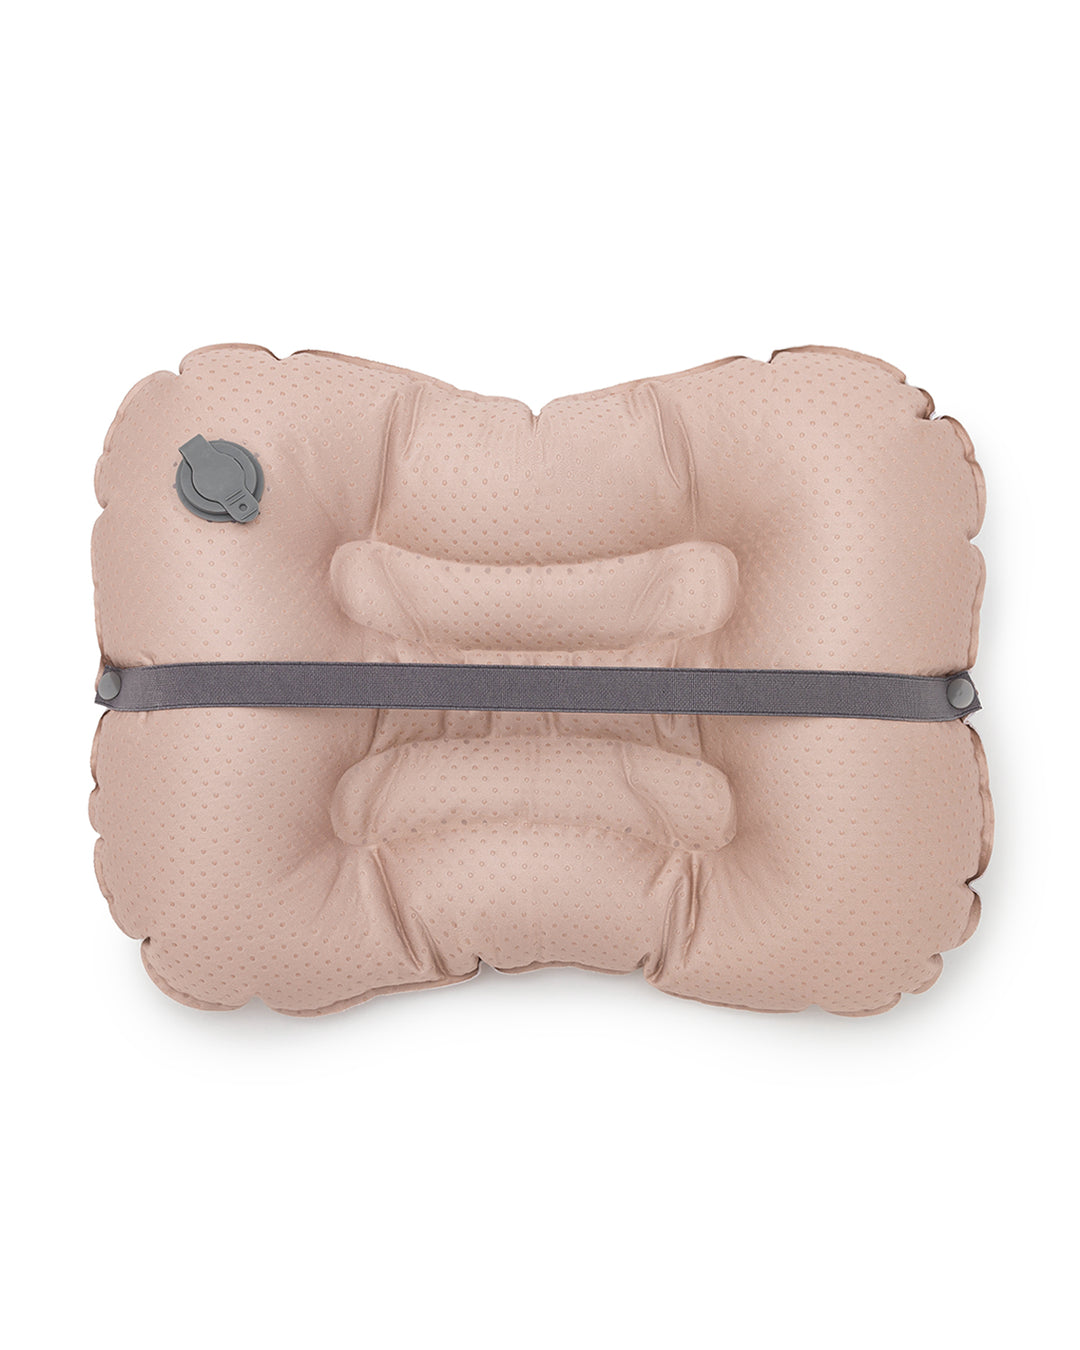 Coussin d'assise gonflable - Rose glacée